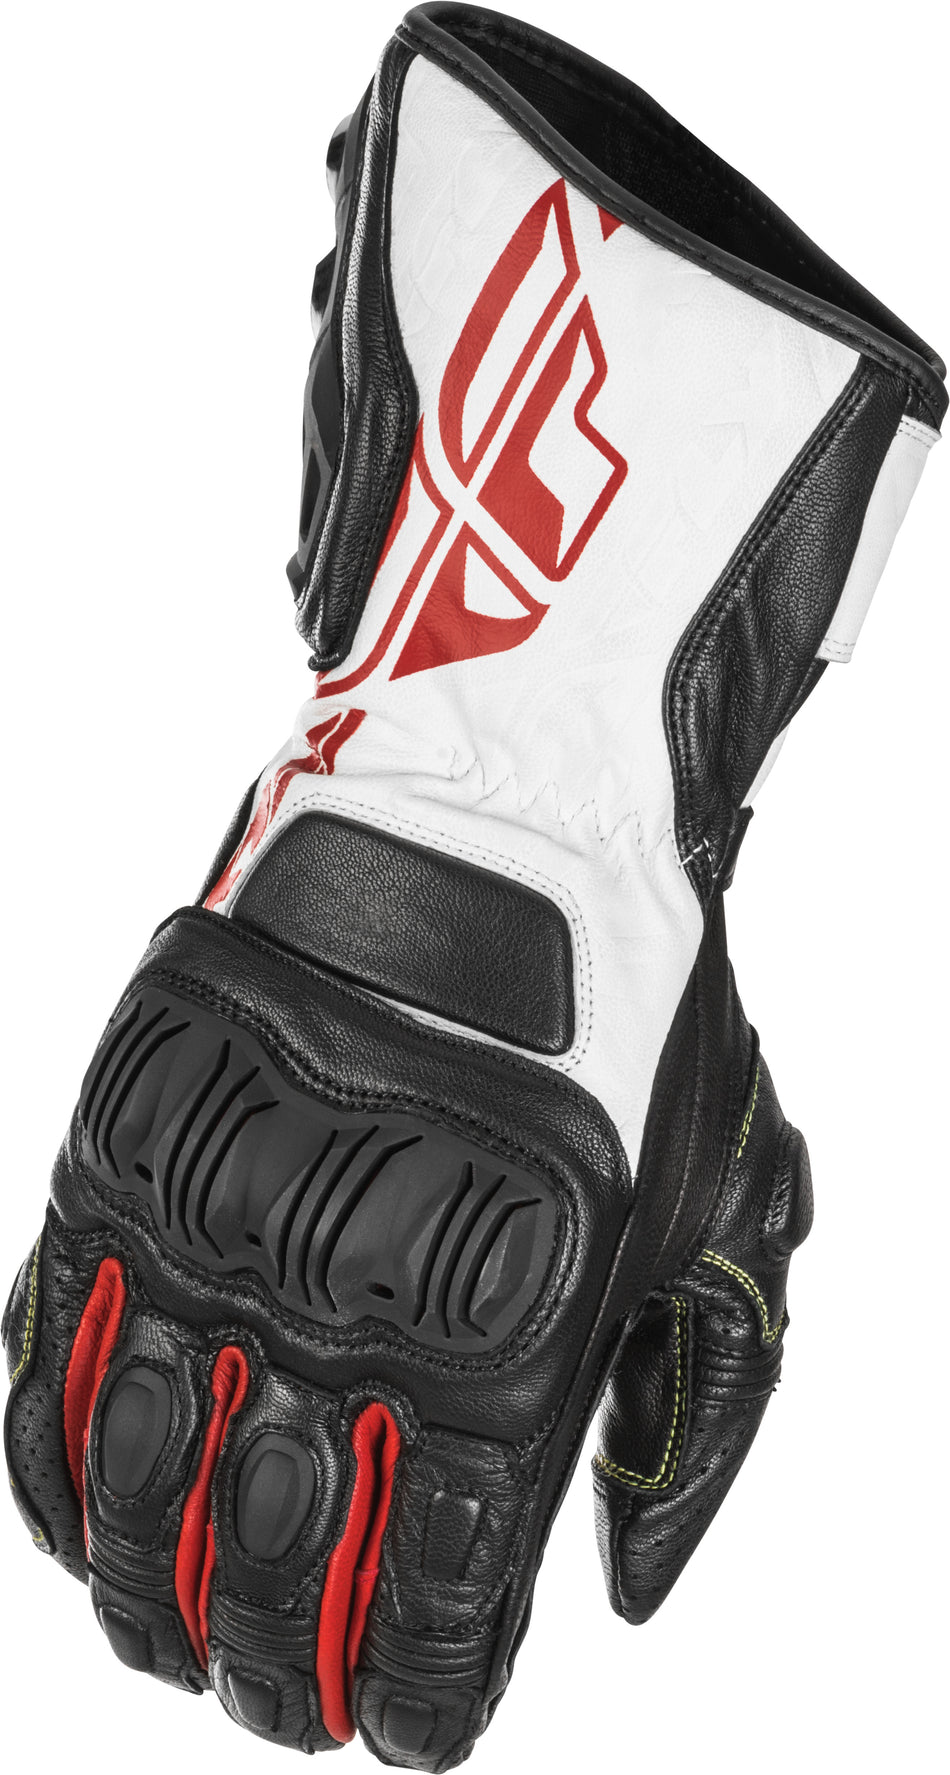 FLY RACING Fl-2 Gloves Black/White/Red Xl #5884 476-2081~5